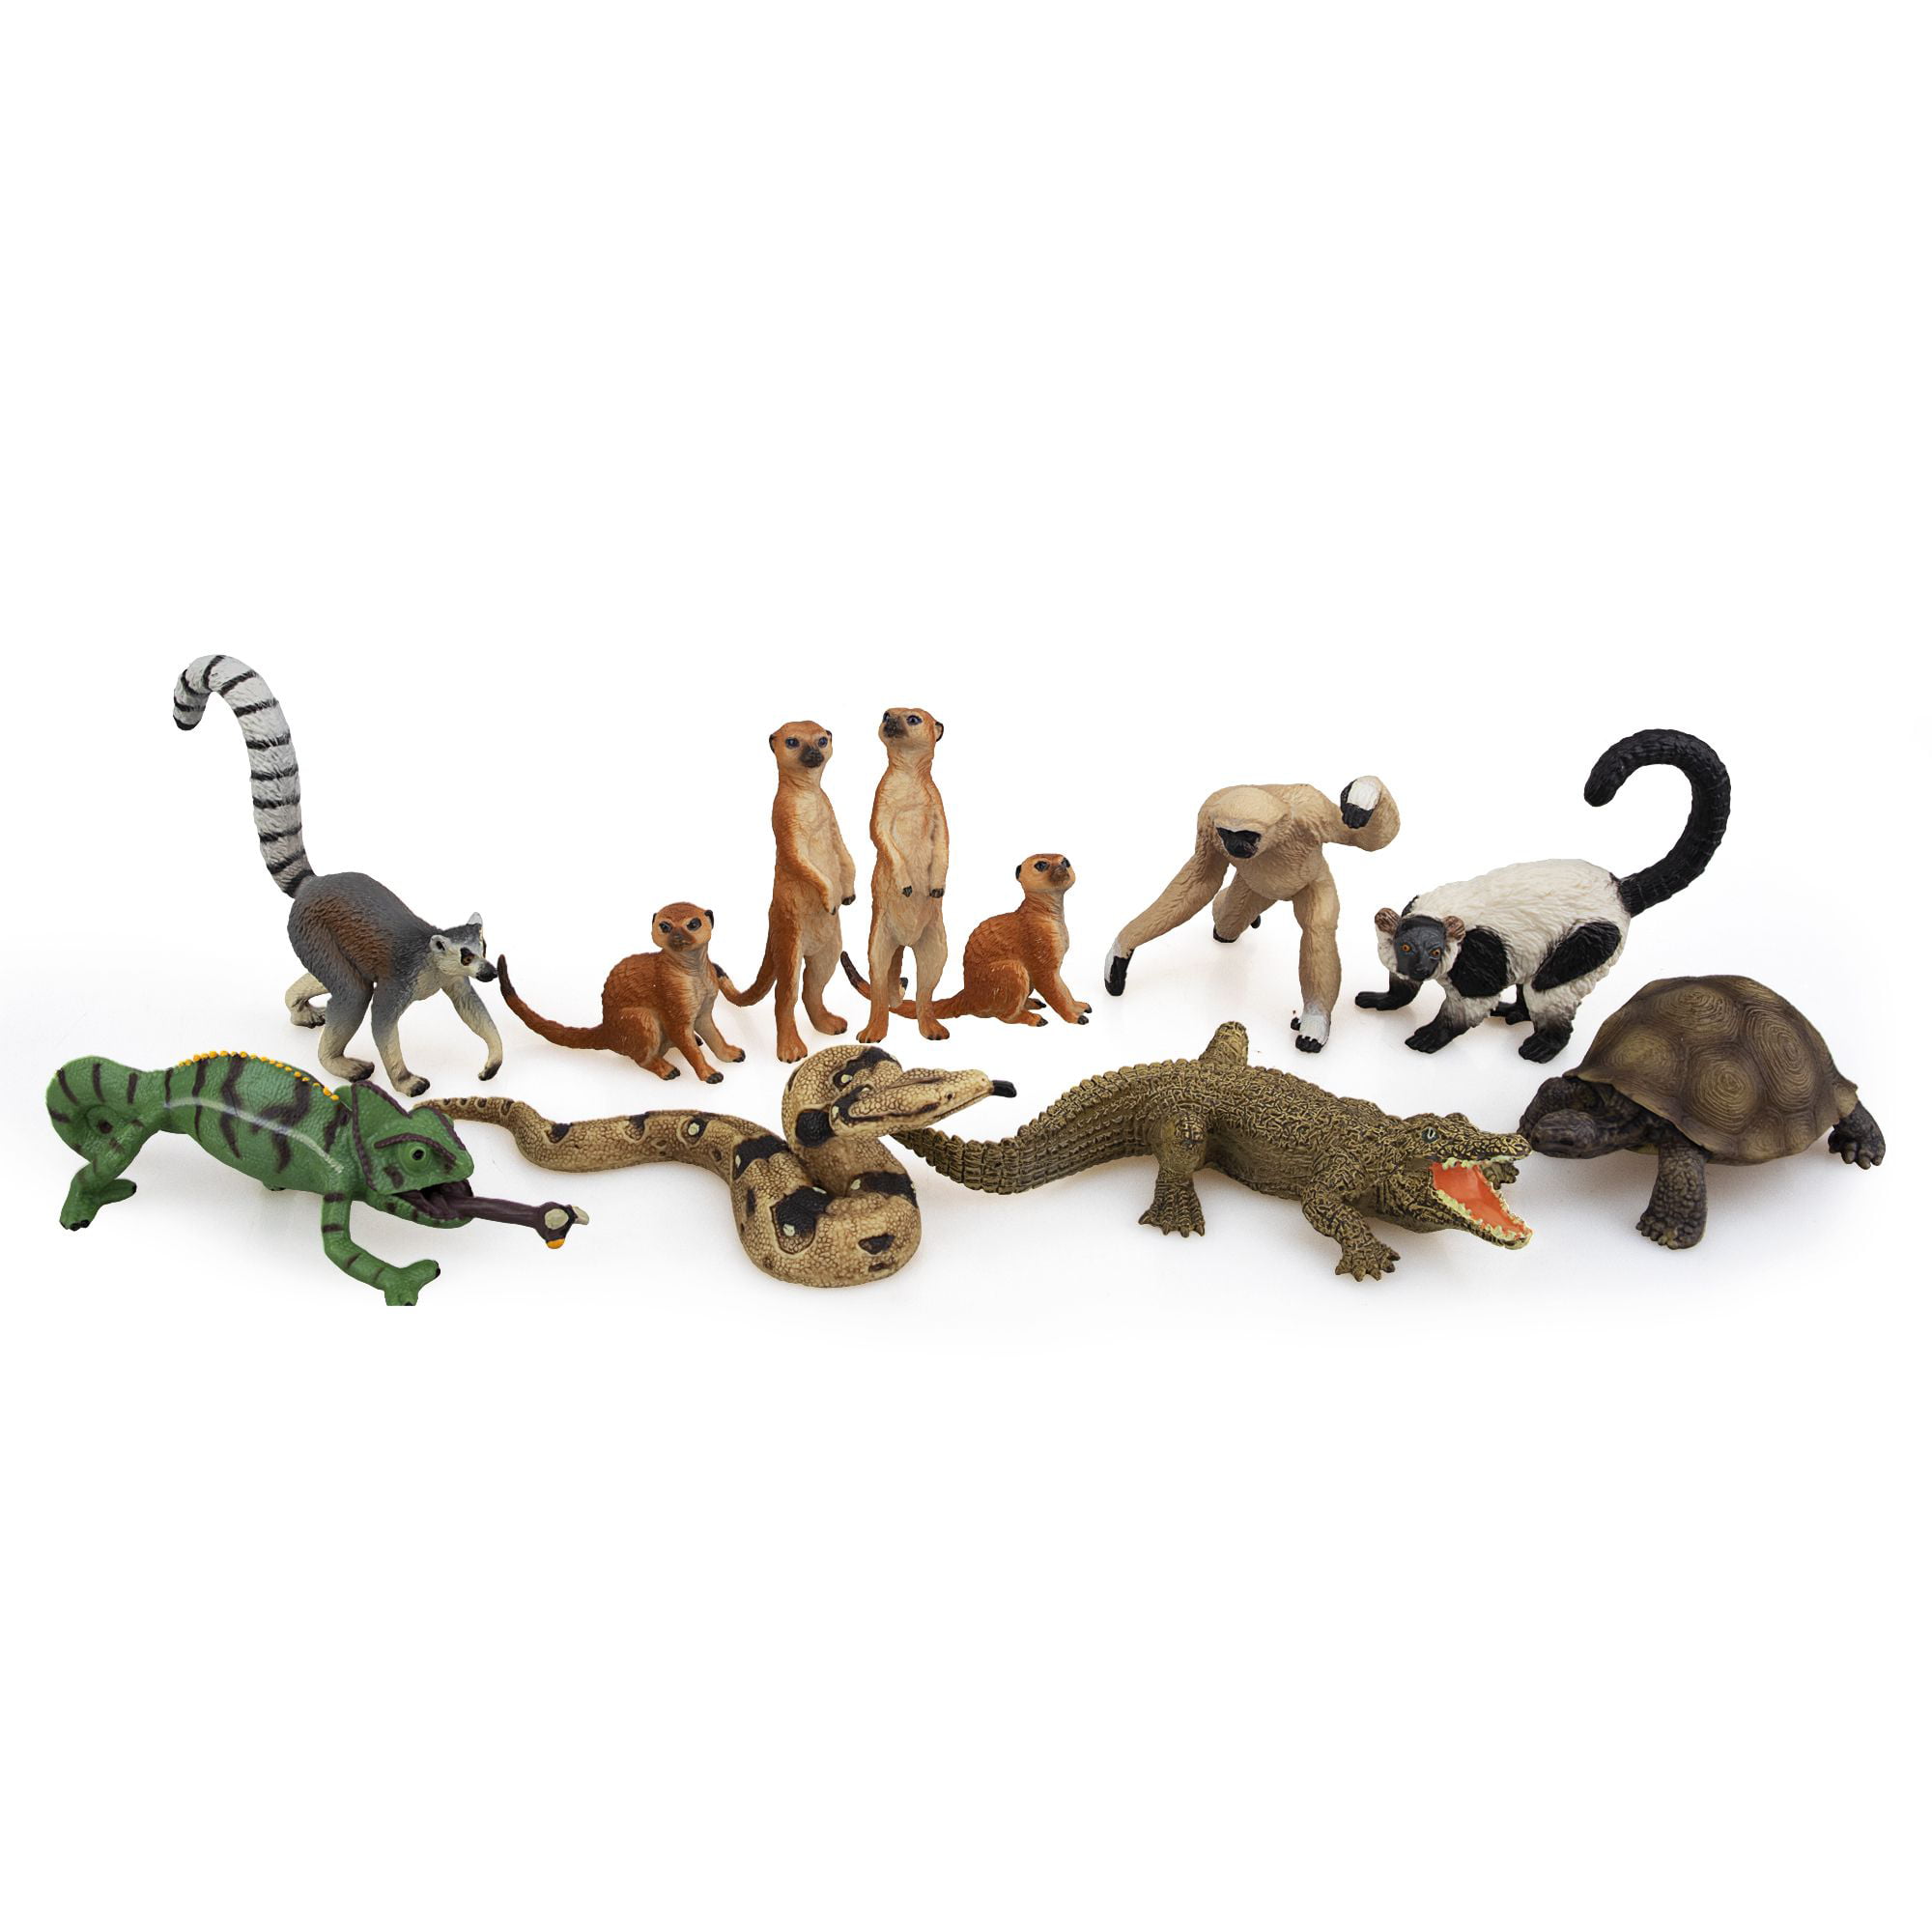 Christmas Birthday Gift Party Favor School Project for Kids Toddlers TOYMANY 11PCS Madagascar Jungle Animals Figurines Toy with Meerkat Lemur Chameleon Crocodile-Jungle Forest Zoo Animal Figures Set 